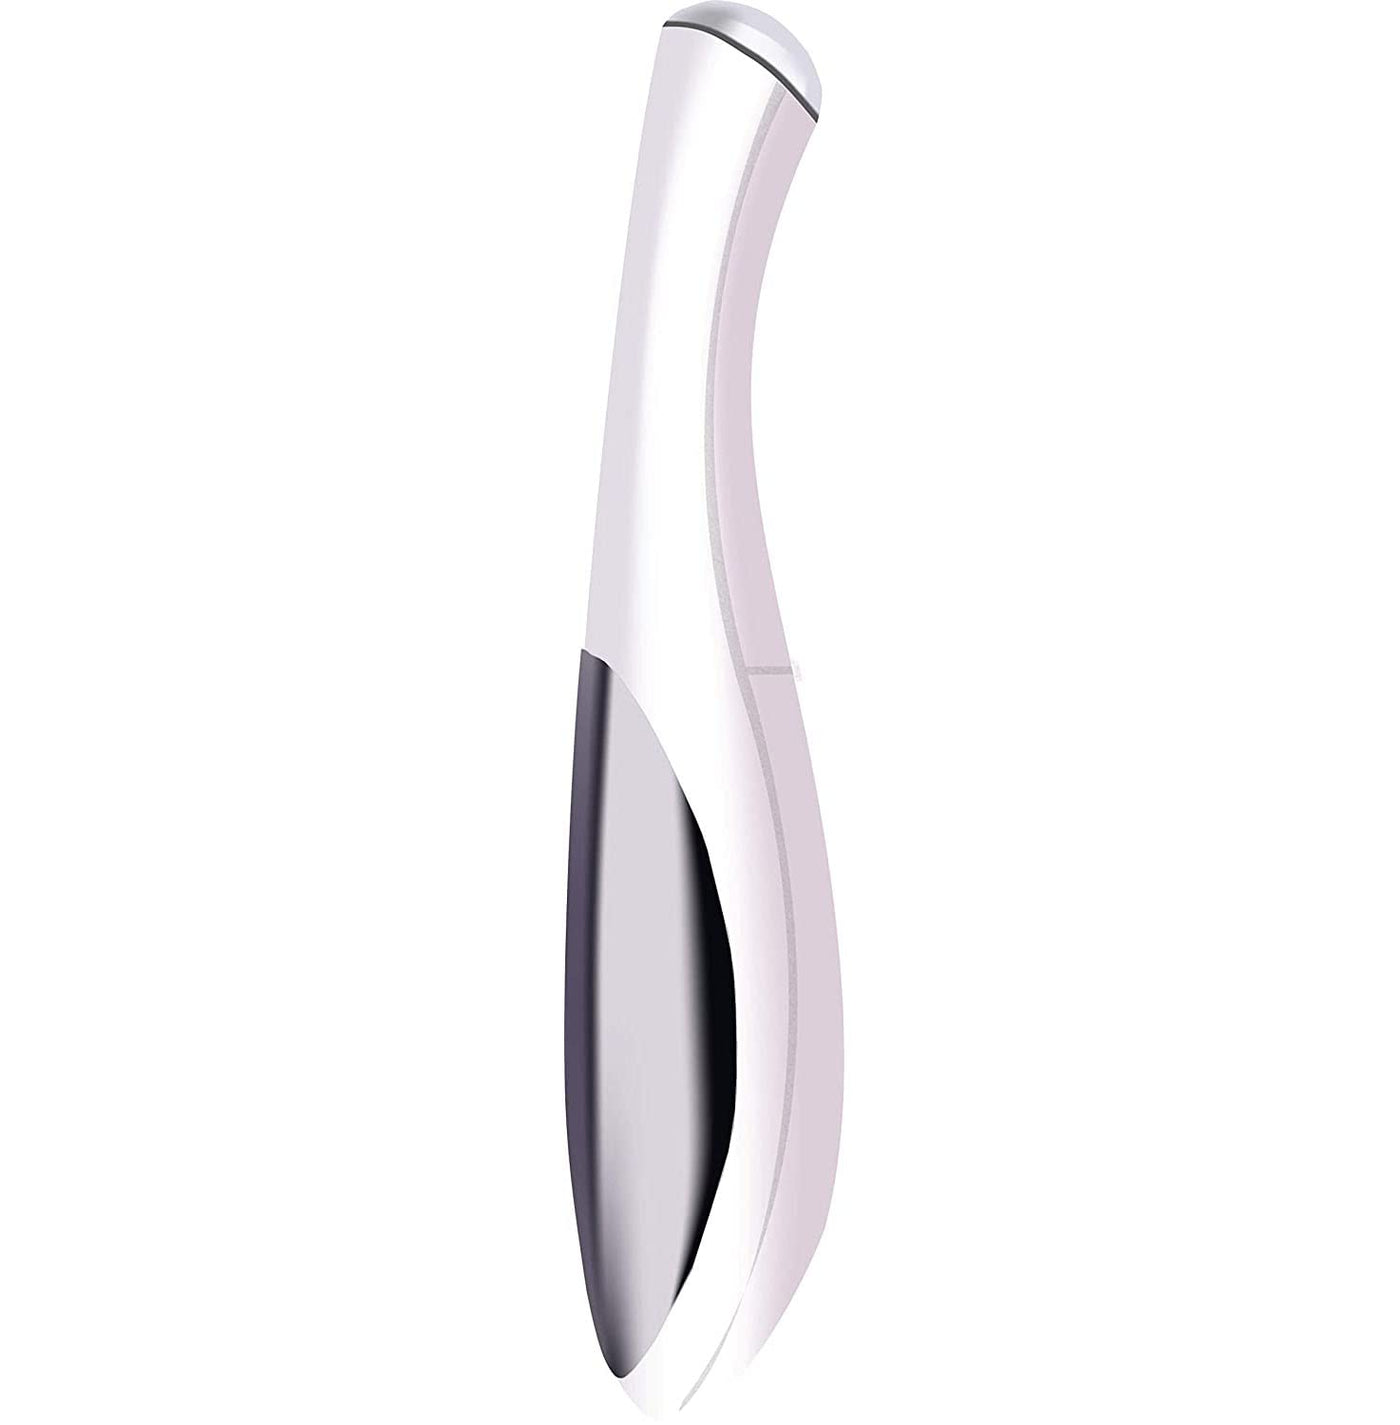 Swiss Botany Beauty White / 1 / 1 Swiss Botany Ionic Lift Wand - Wrinkle Eraser Helps Anti-Aging Nutrients Penetrate Deeper - Gentle Massage Action - Use with Serums, Gels, Moisturizers and Creams - Battery Operated